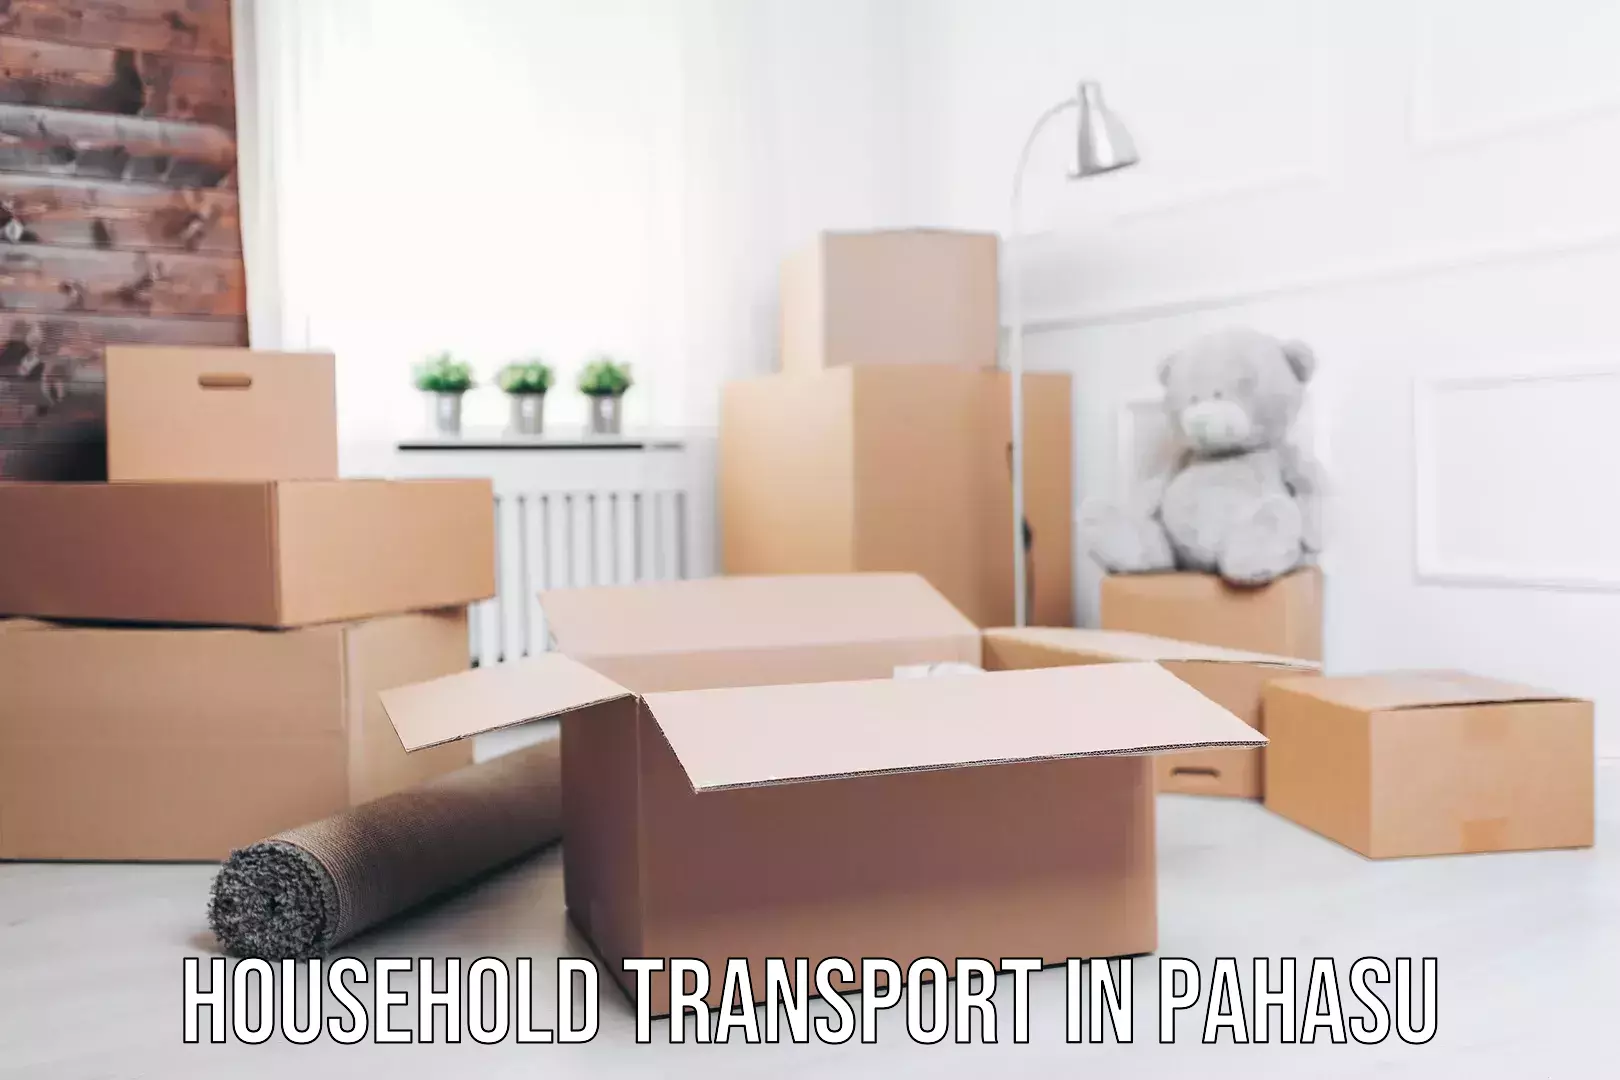 Expert furniture movers in Pahasu